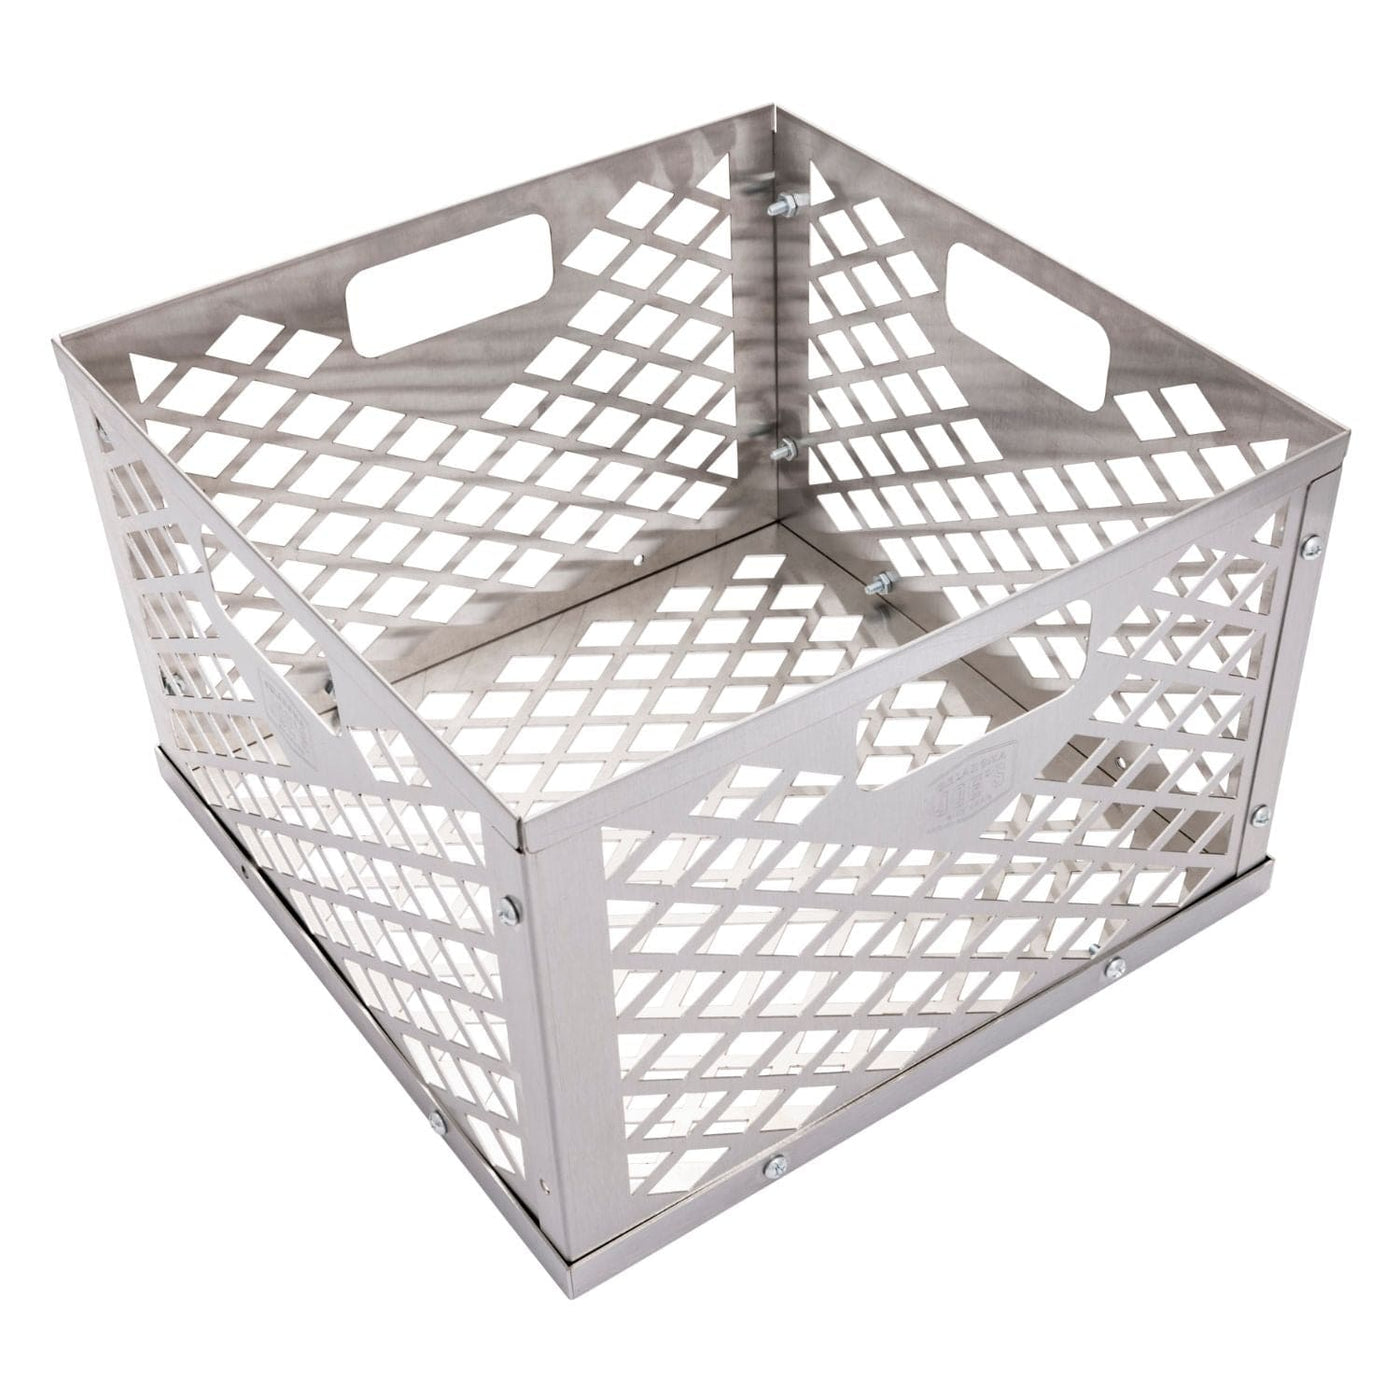 Char-Broil Char-Broil Firebox Basket Camping And Outdoor